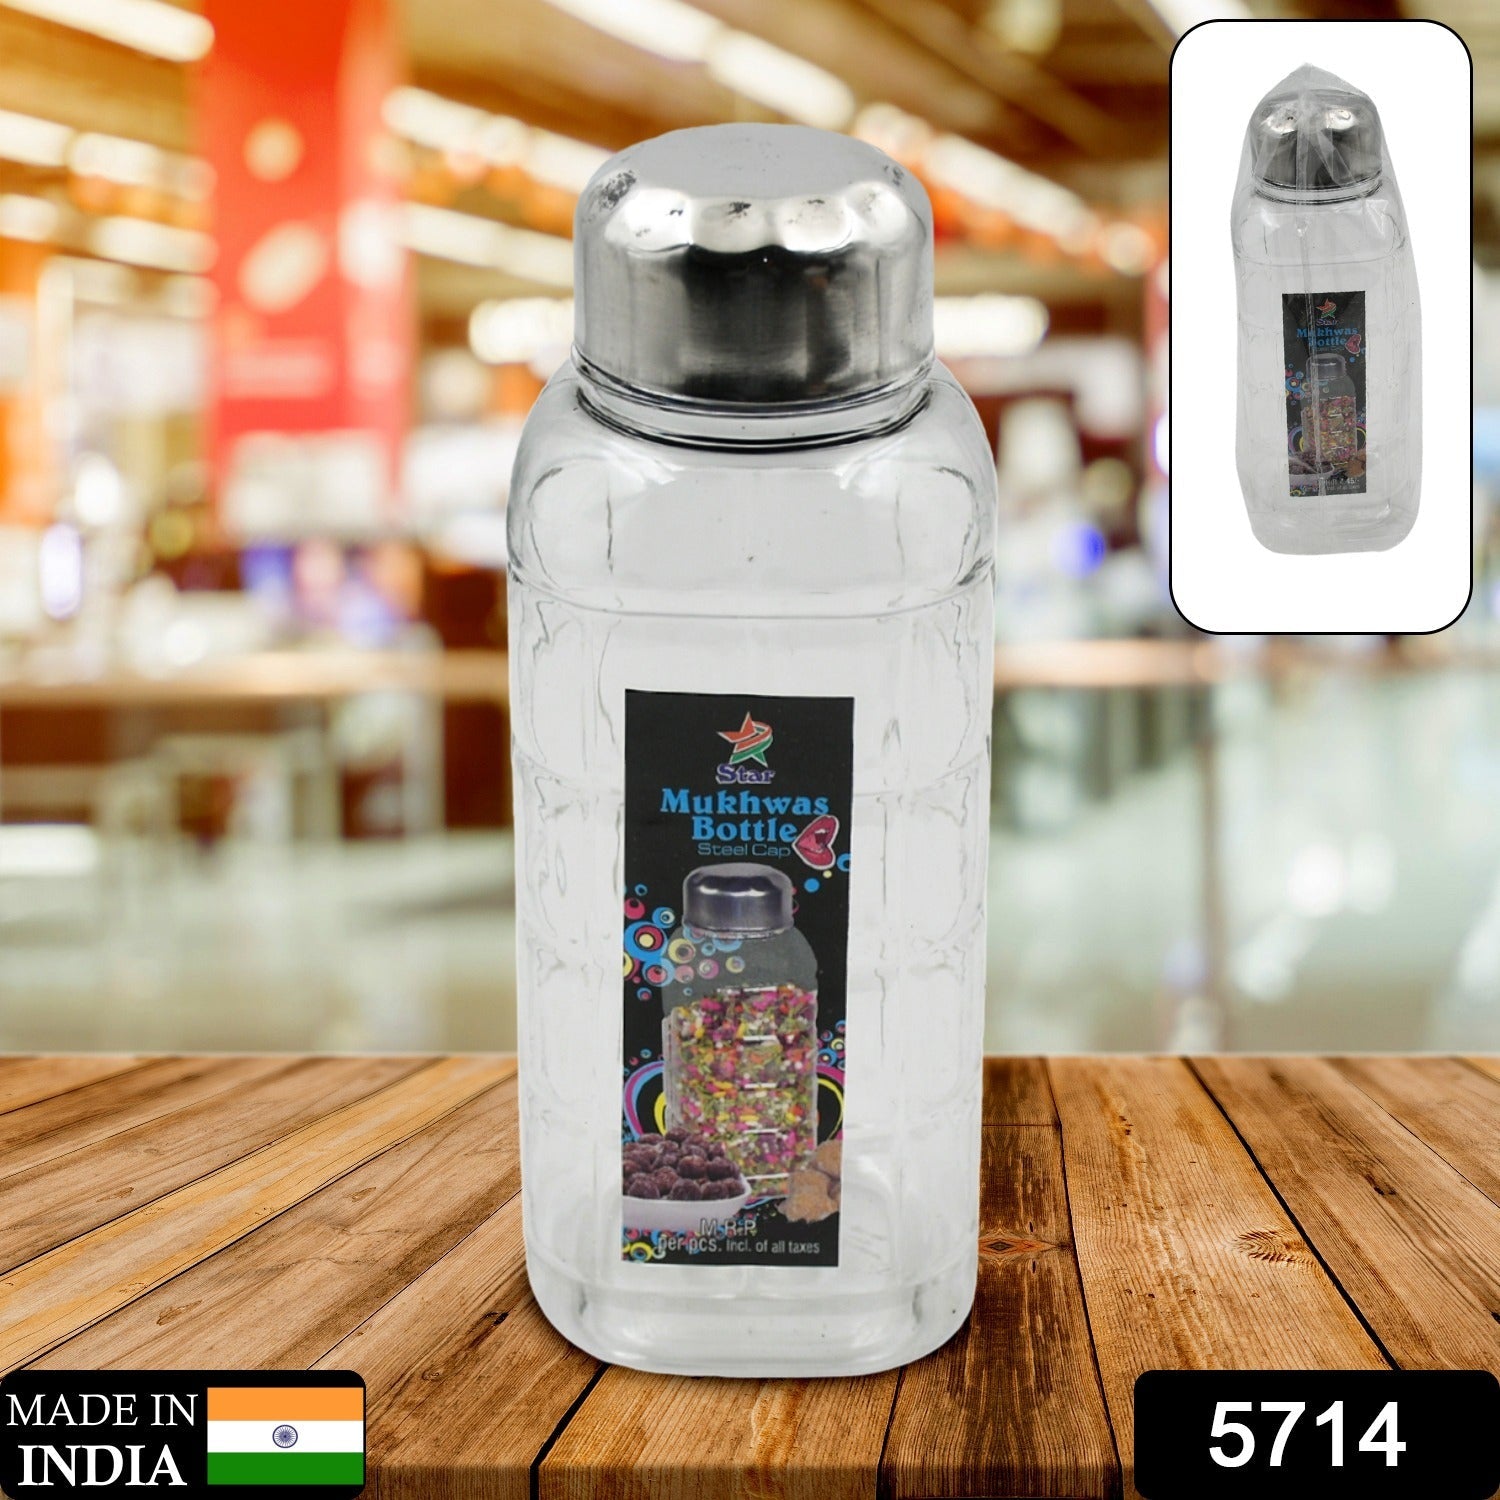 5714 Plastic Transparent Mukhwas Bottle With Steel Cap / Mouth Freshener / Dryfruits Multipurpose Air Tight and BPA Free Kitchen Storage Bottle (1 Pc)